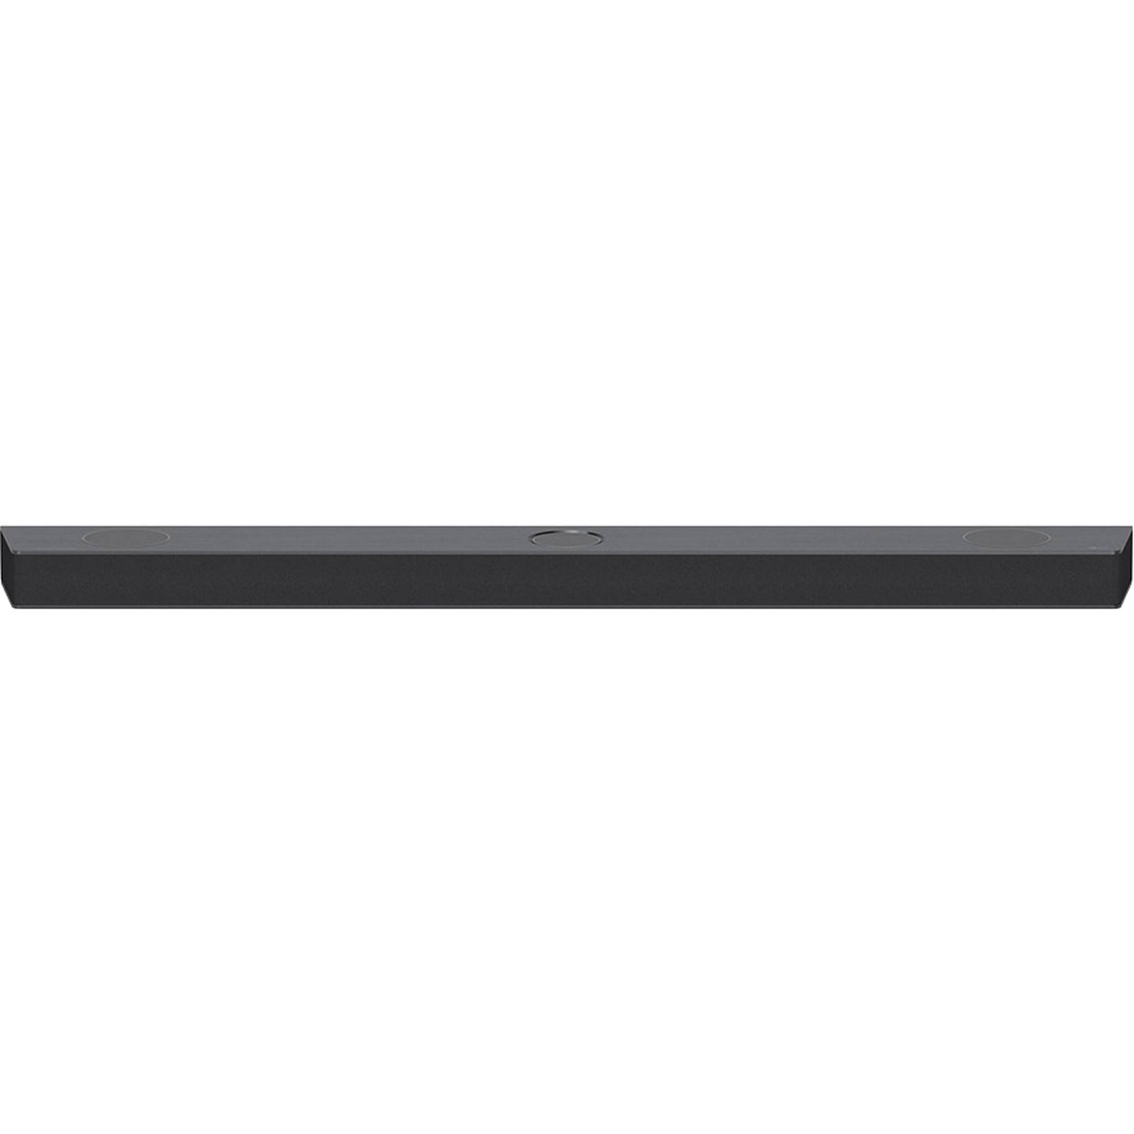 LG S90QY 5.1.3 Channel 570W High Res Sound Bar with Dolby Atmos and Apple Airplay 2 - Image 3 of 8